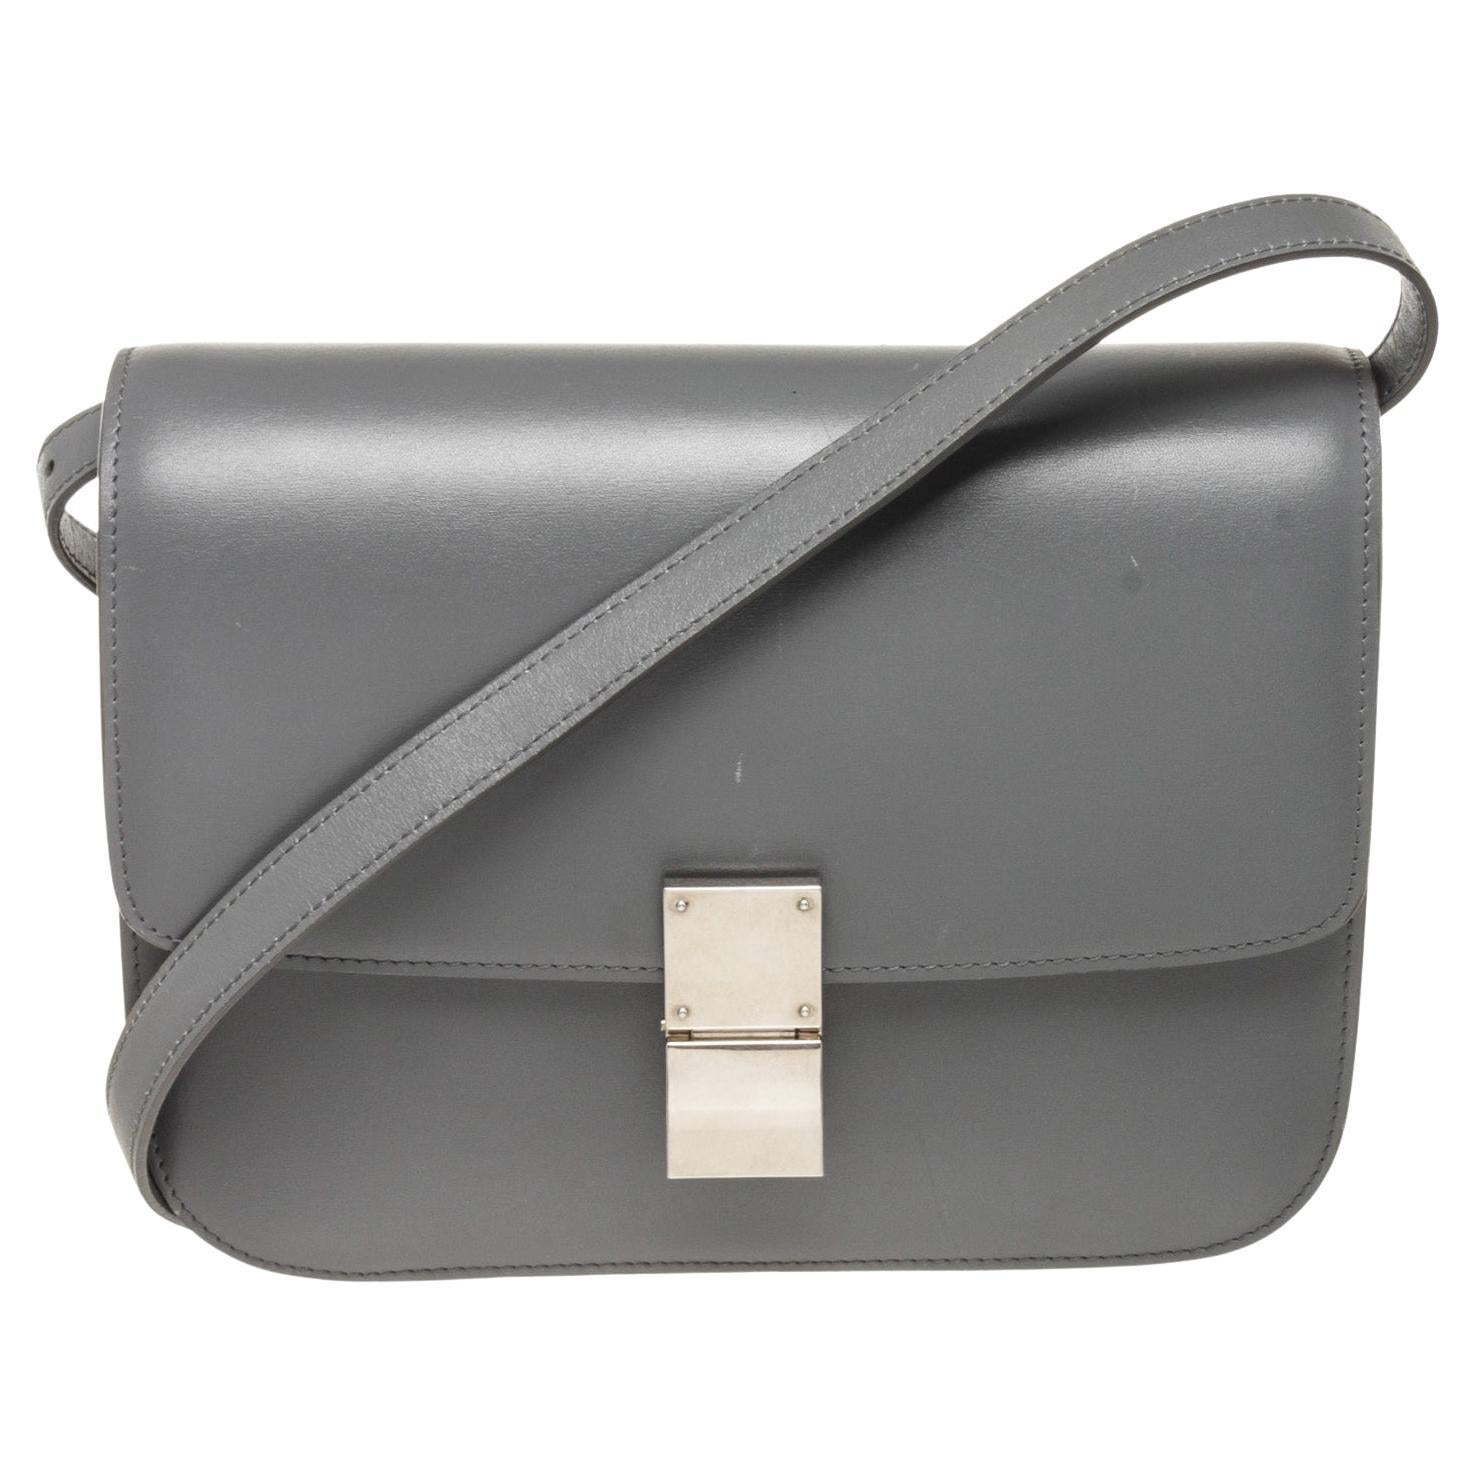 Celine Grey Leather Classic Medium Shoulder Bag with leather For Sale